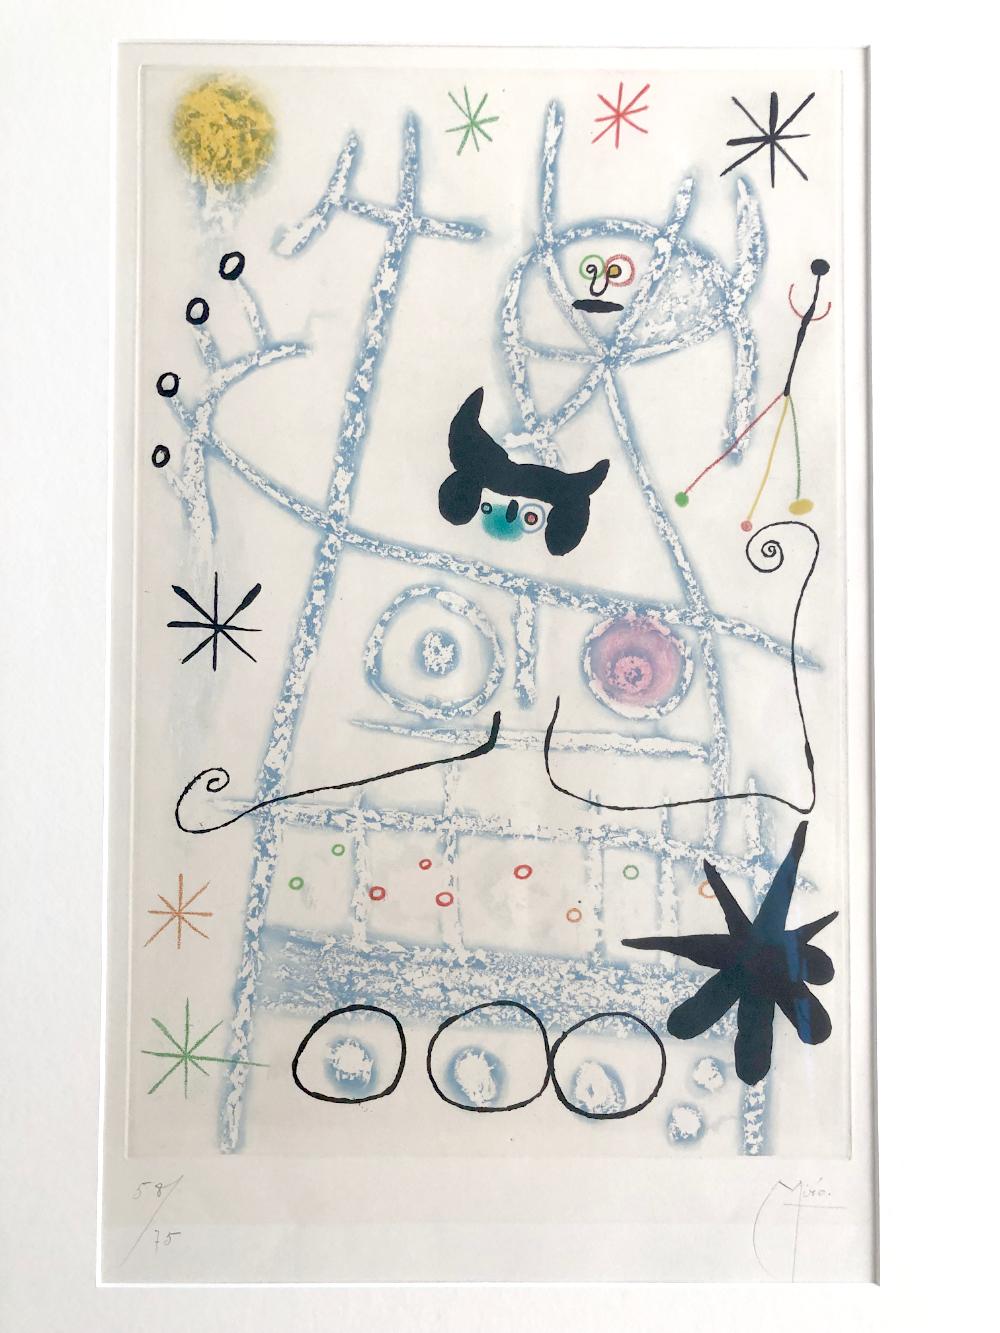 Aquatint printed in colours, 1958, on BFK Rives, numbered from the edition of 75, signed in pencil, printed by Crommelynck et Dutrou and published by Maeght, Paris, 66.2 × 50.2 cm. (26 x 19.8 in.)
